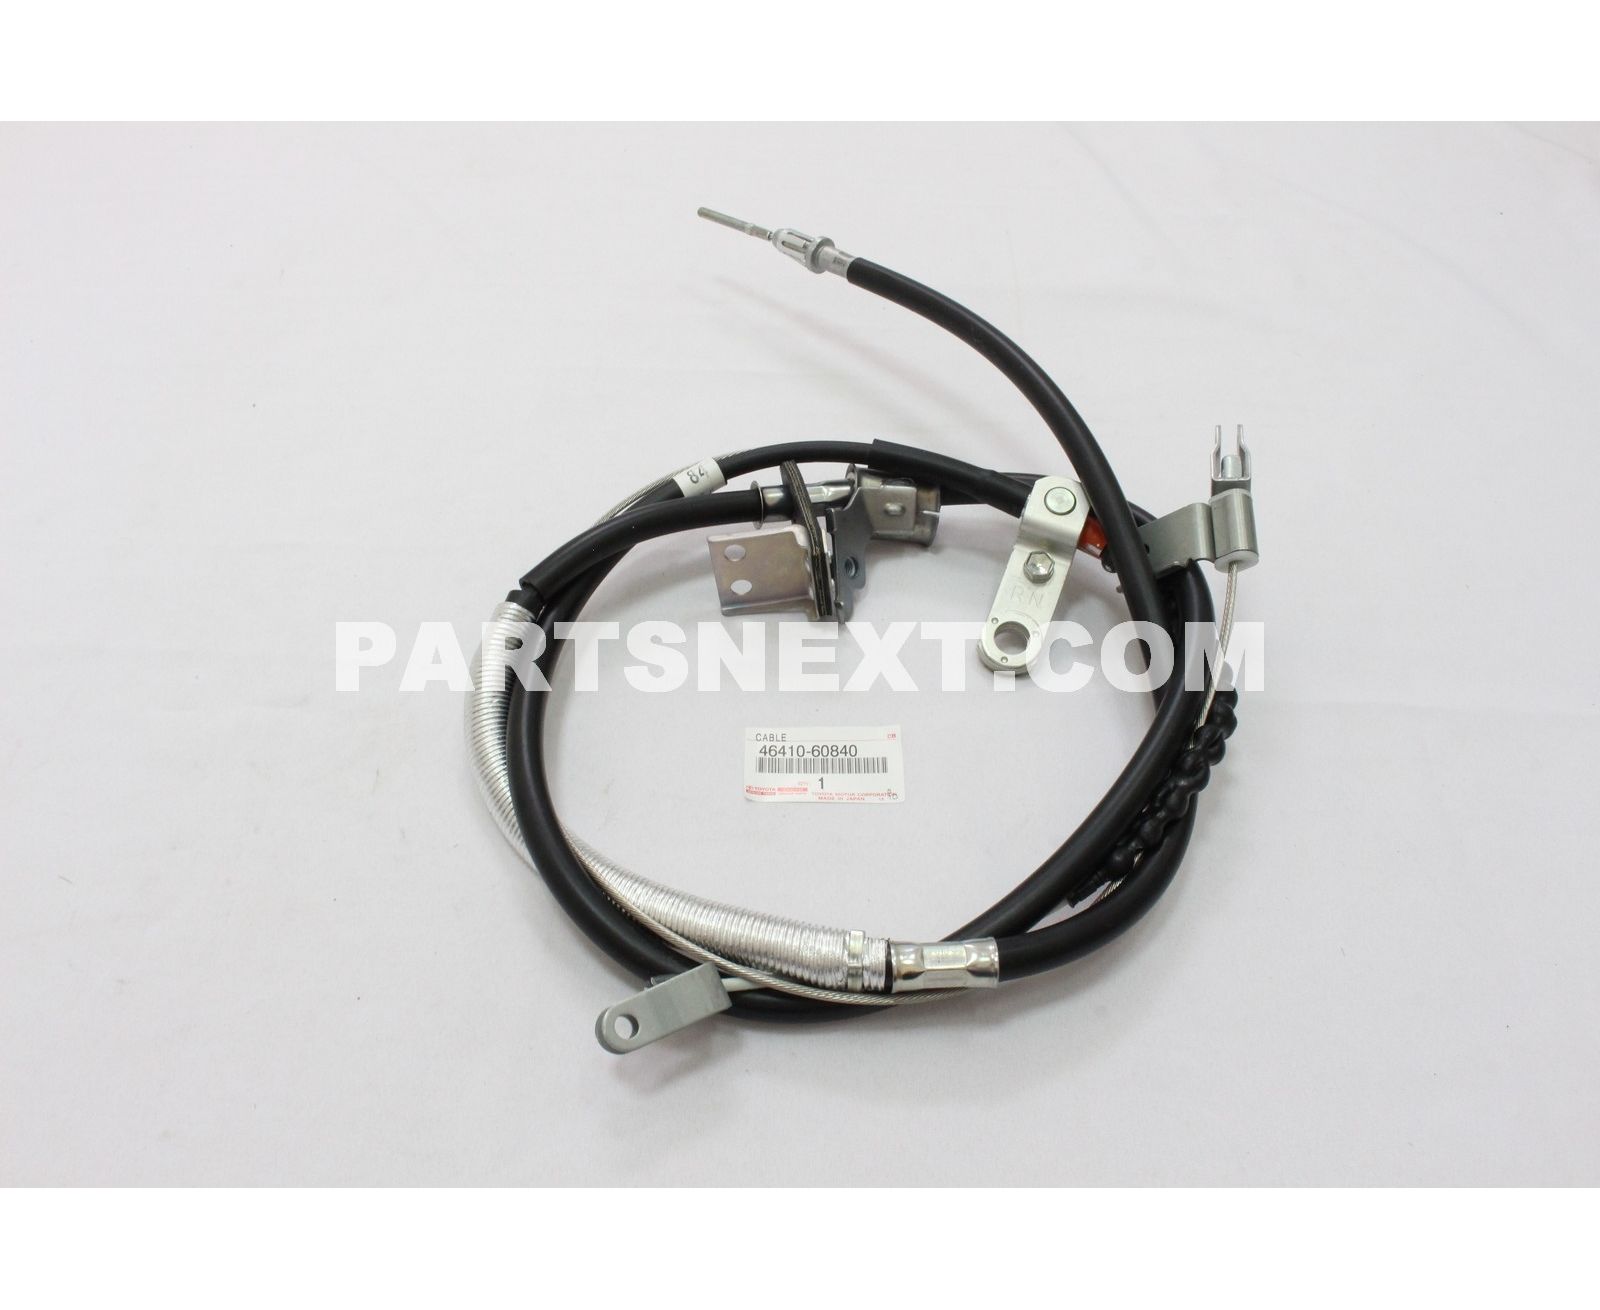 Toyota :: 46410-60840 CABLE ASSY, PARKING BRAKE, NO.1